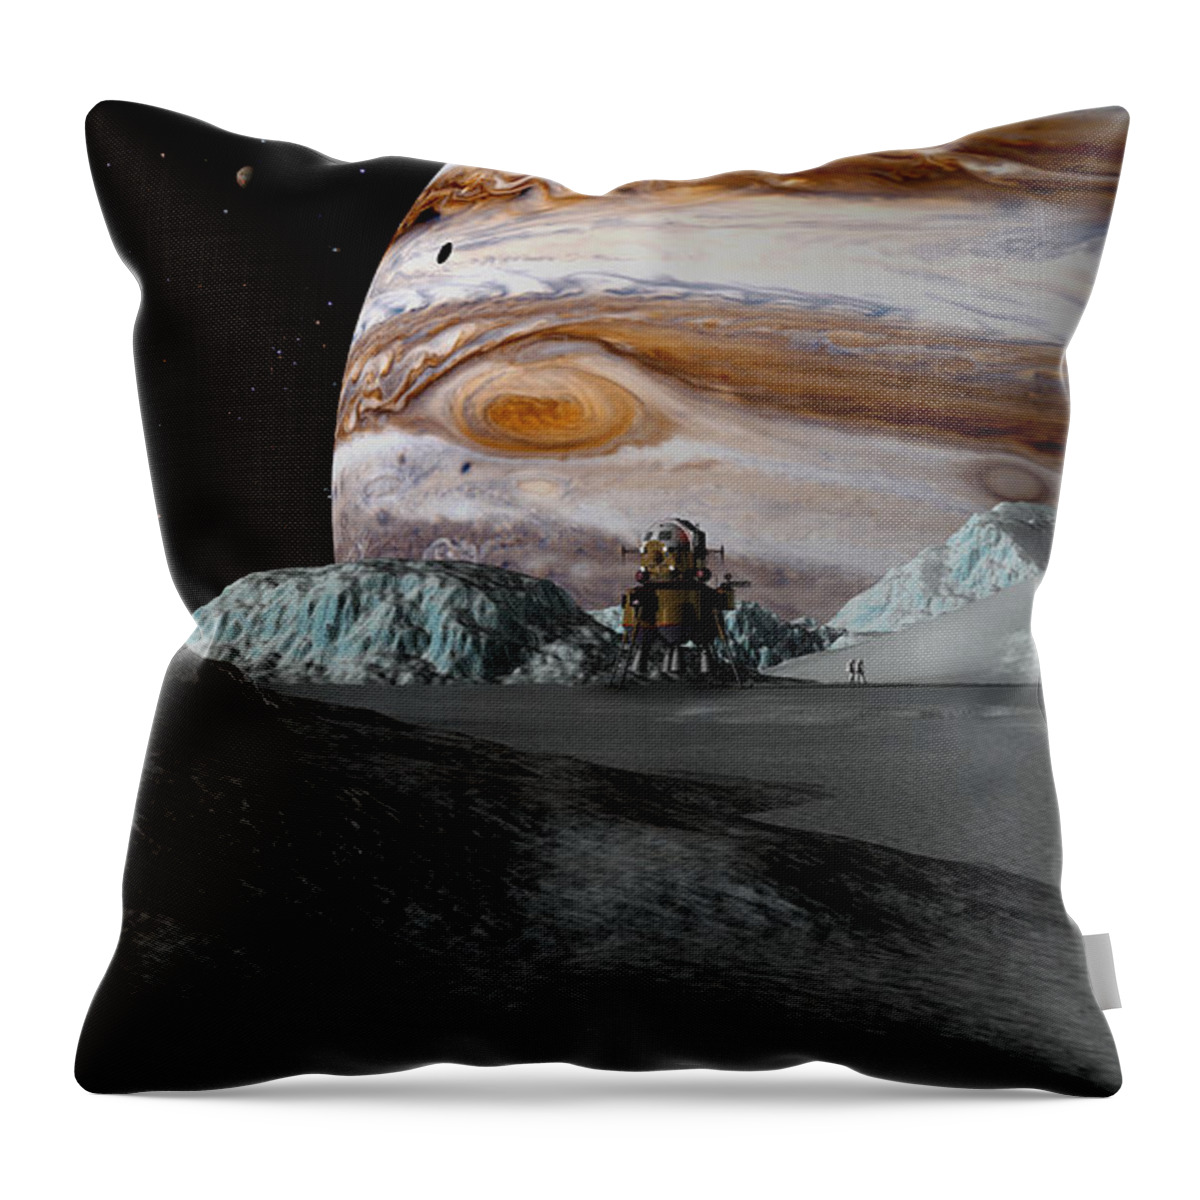 Spaceship Throw Pillow featuring the digital art Lander Ulysses on Europa by David Robinson